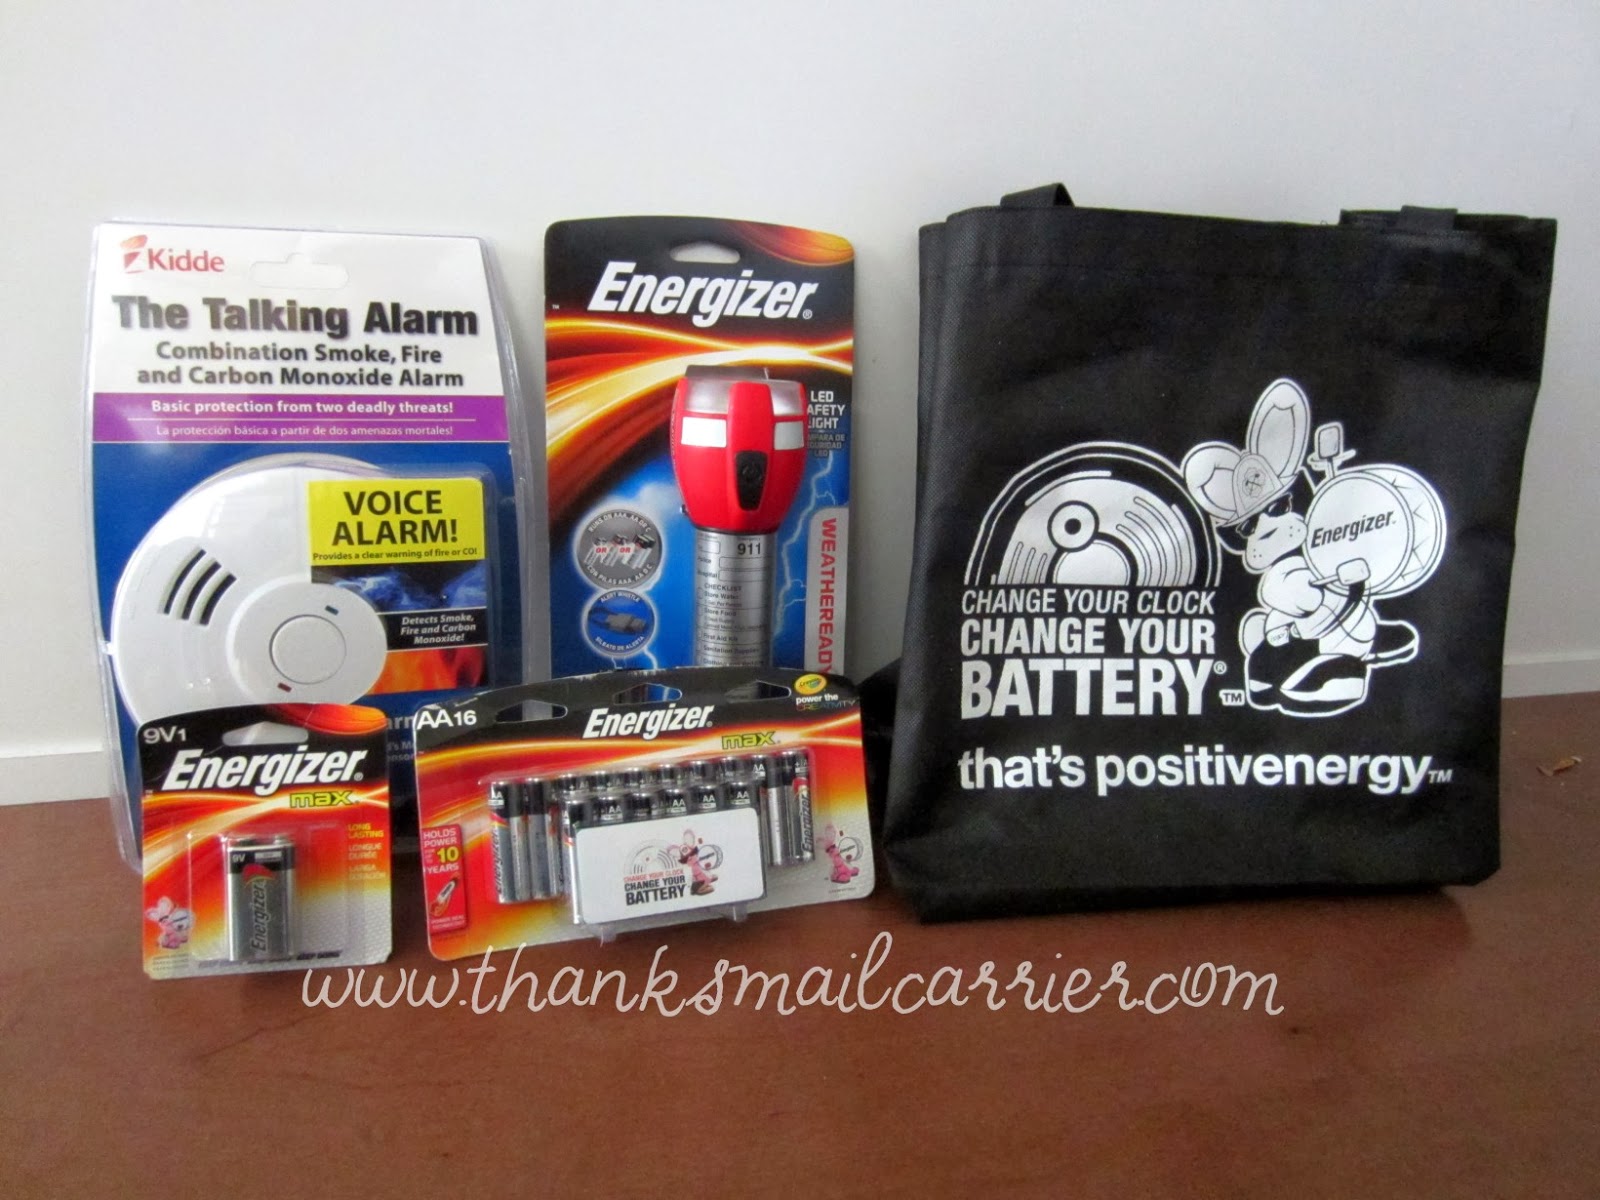 Energizer giveaway